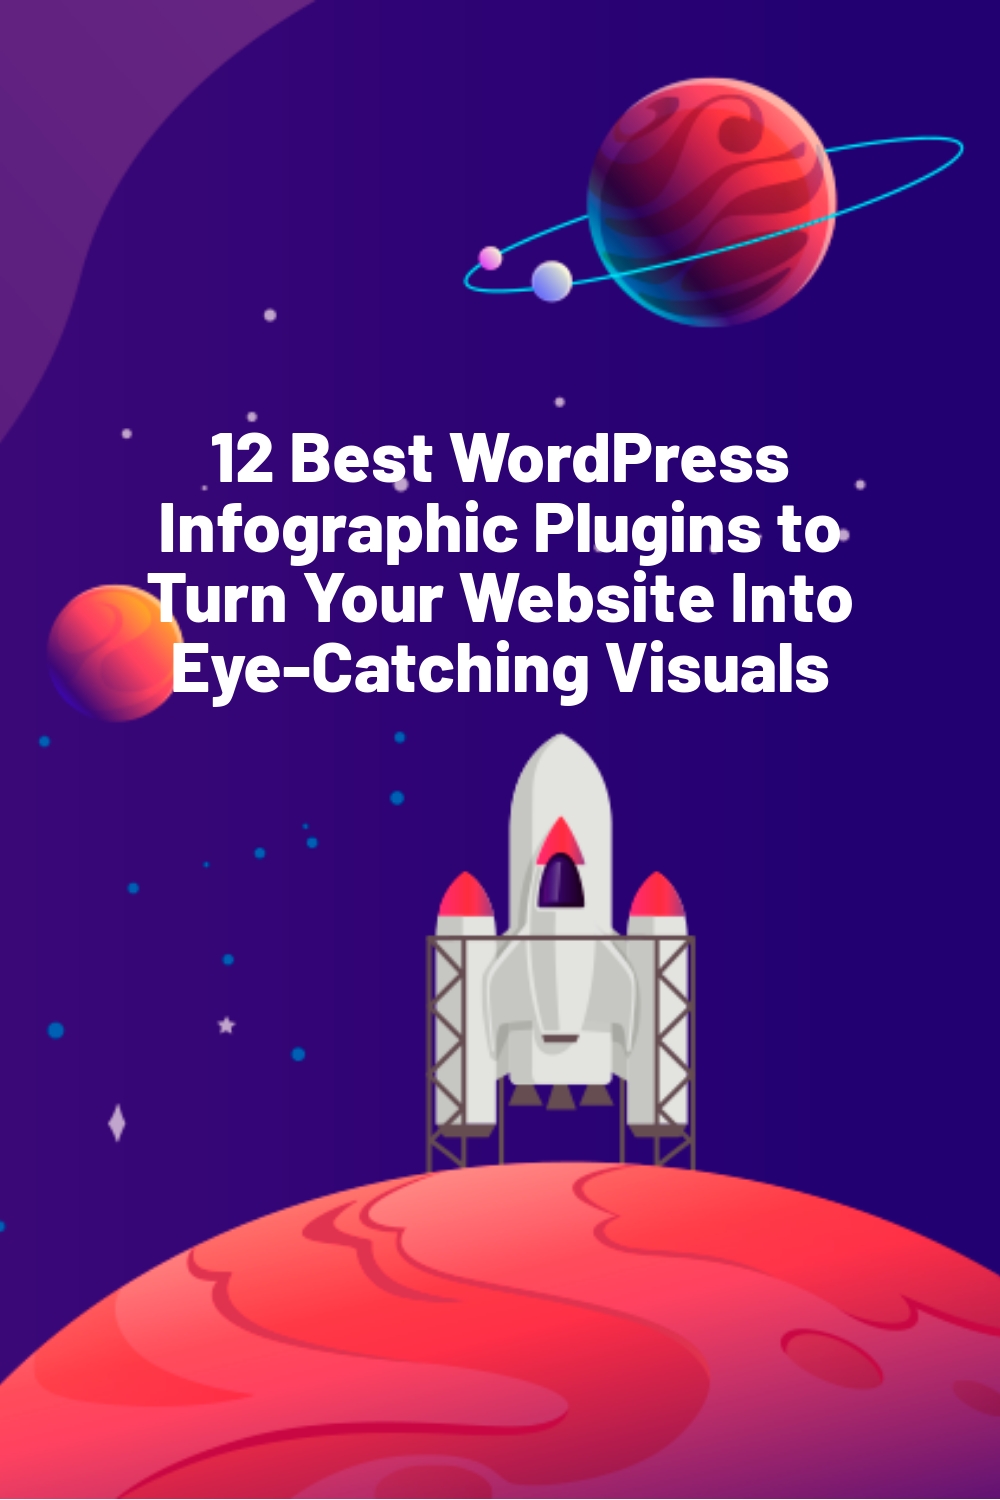 12 Best WordPress Infographic Plugins to Turn Your Website Into Eye-Catching Visuals